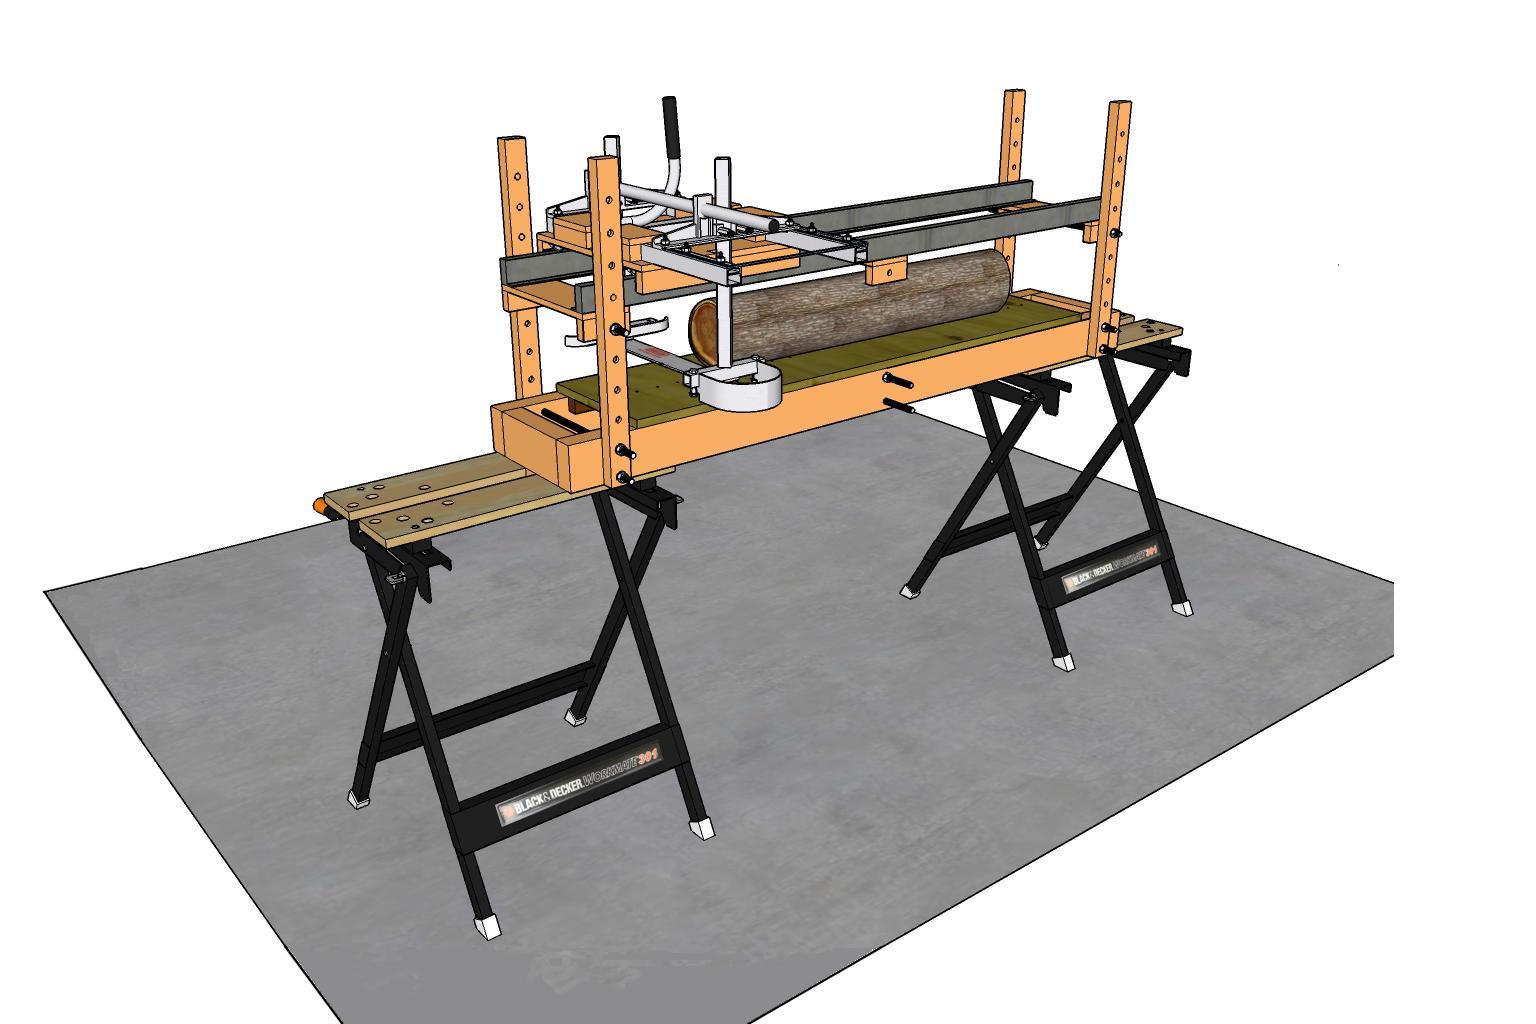 Design for a Chainsaw Mill Jig.